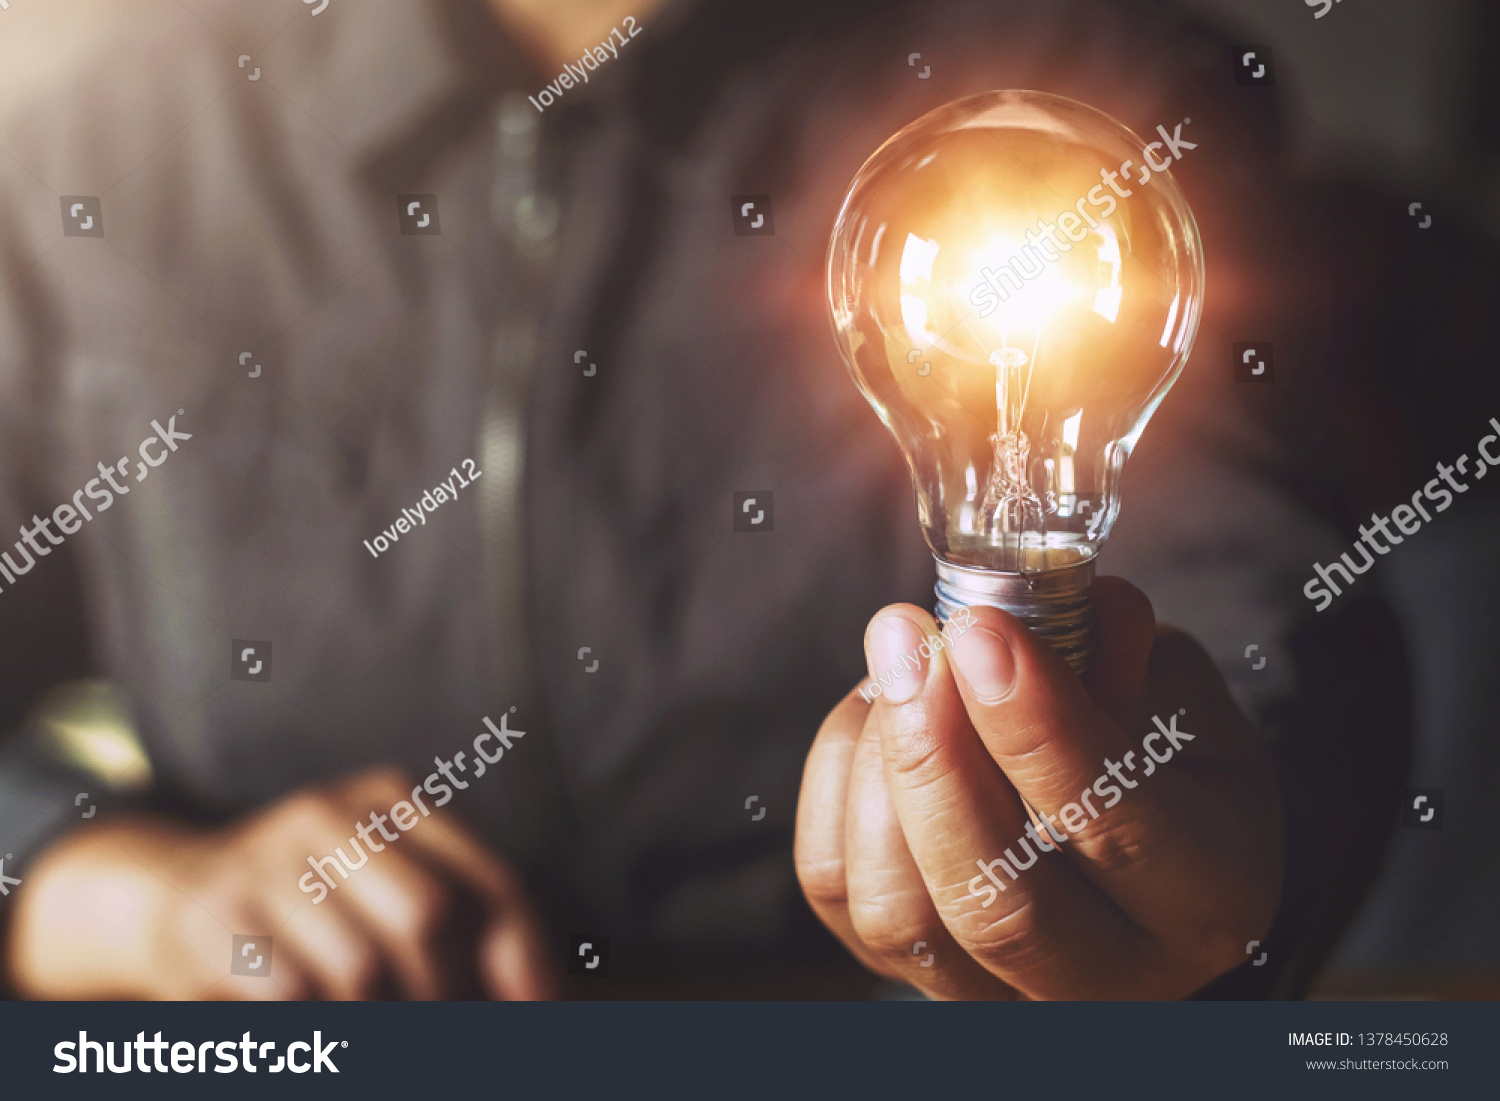 hand holding light bulb. idea concept with innovation and inspiration #1378450628